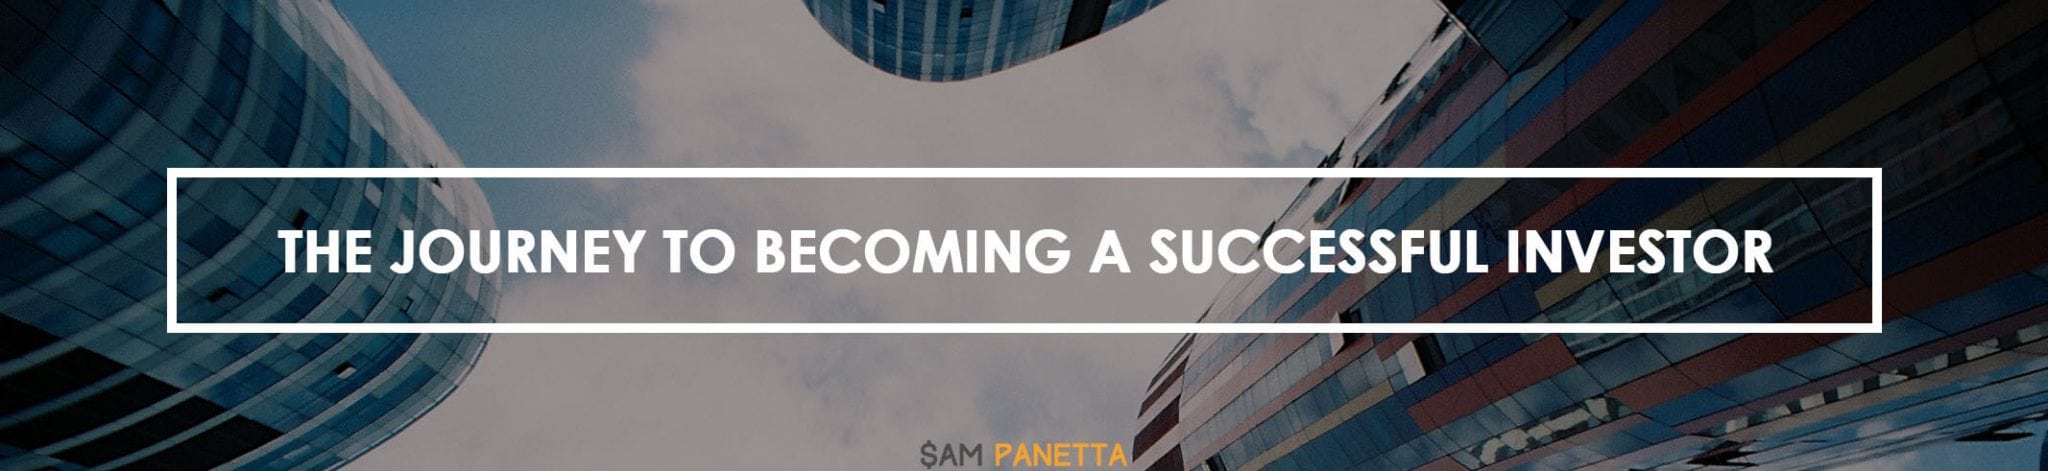 The Journey to Becoming a Successful Investor